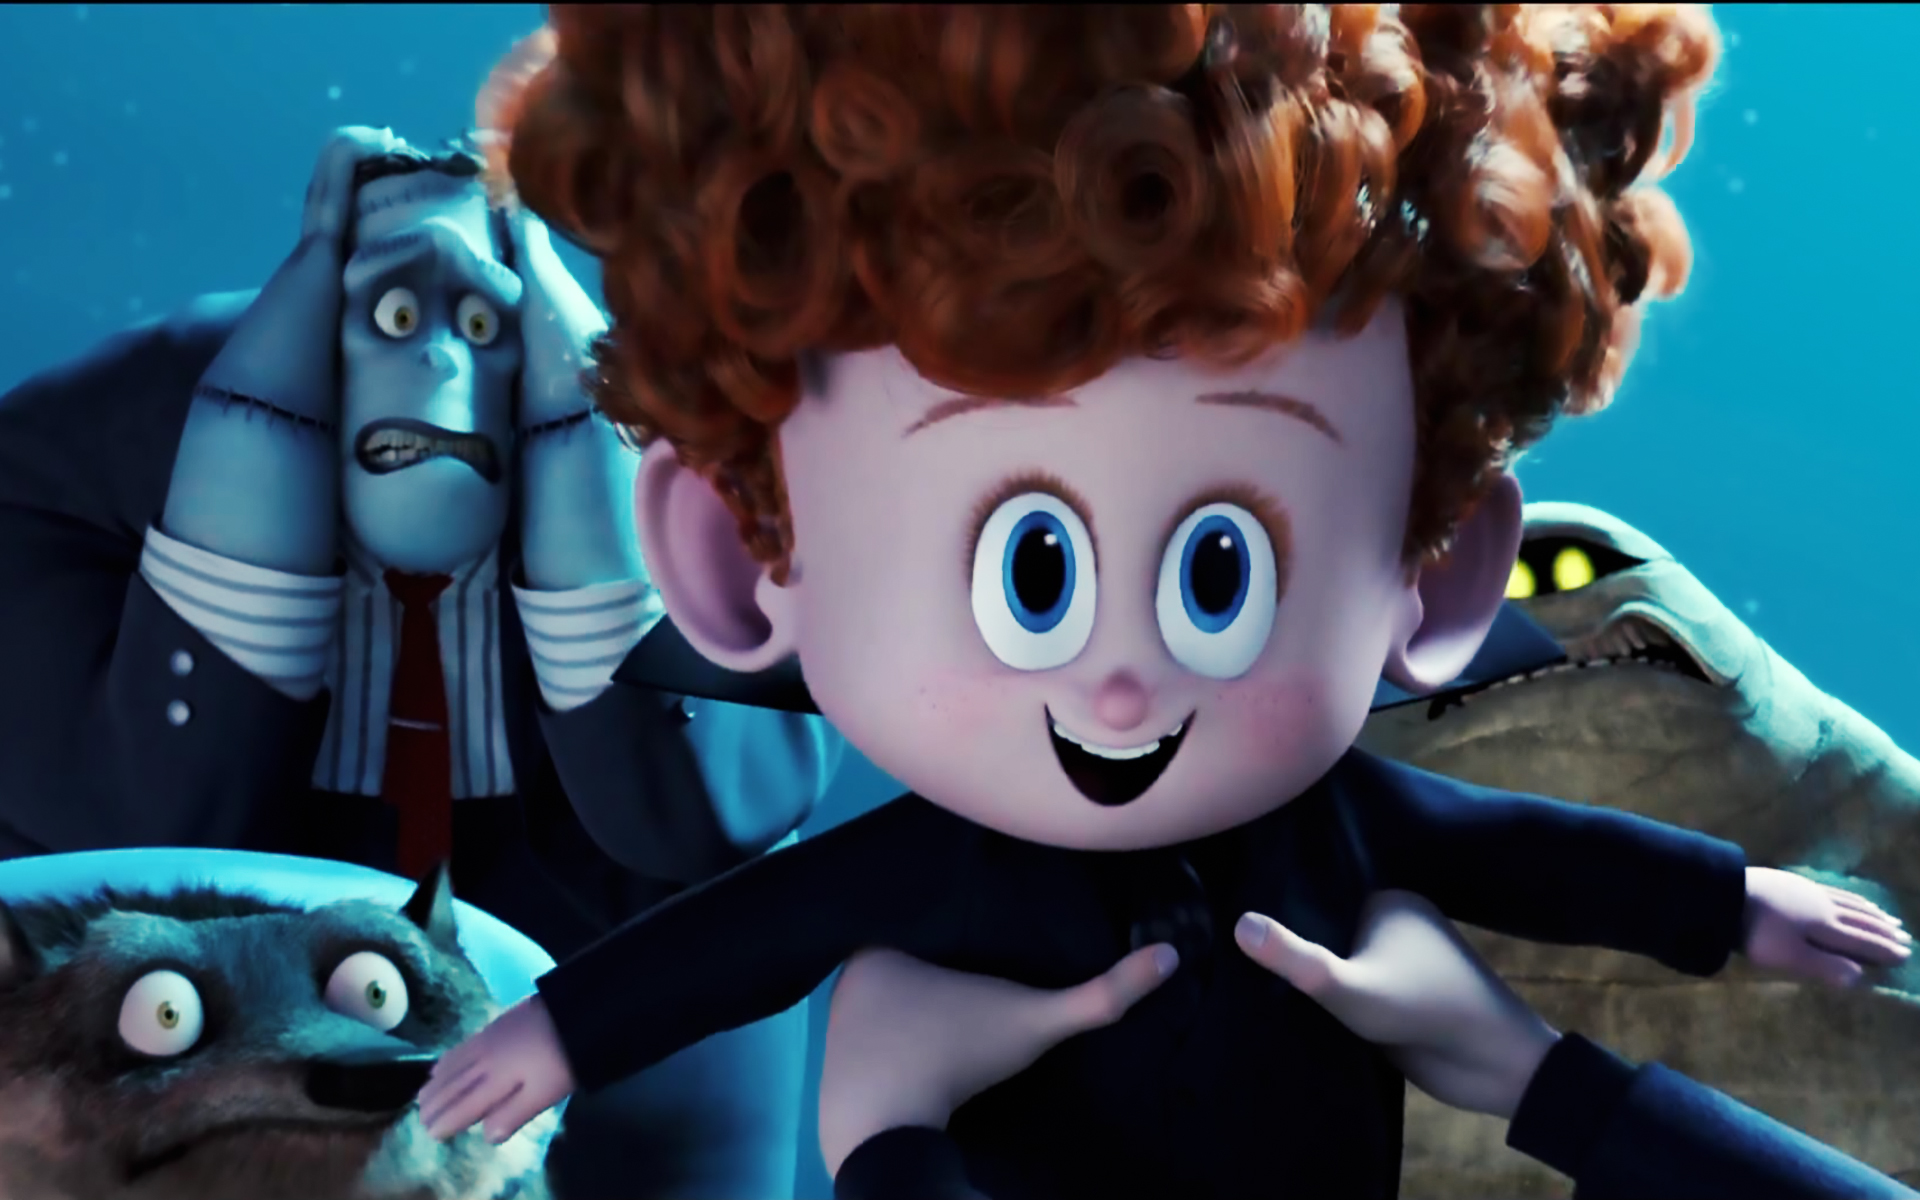 Hotel Transylvania 2 Wallpapers High Quality | Download Free